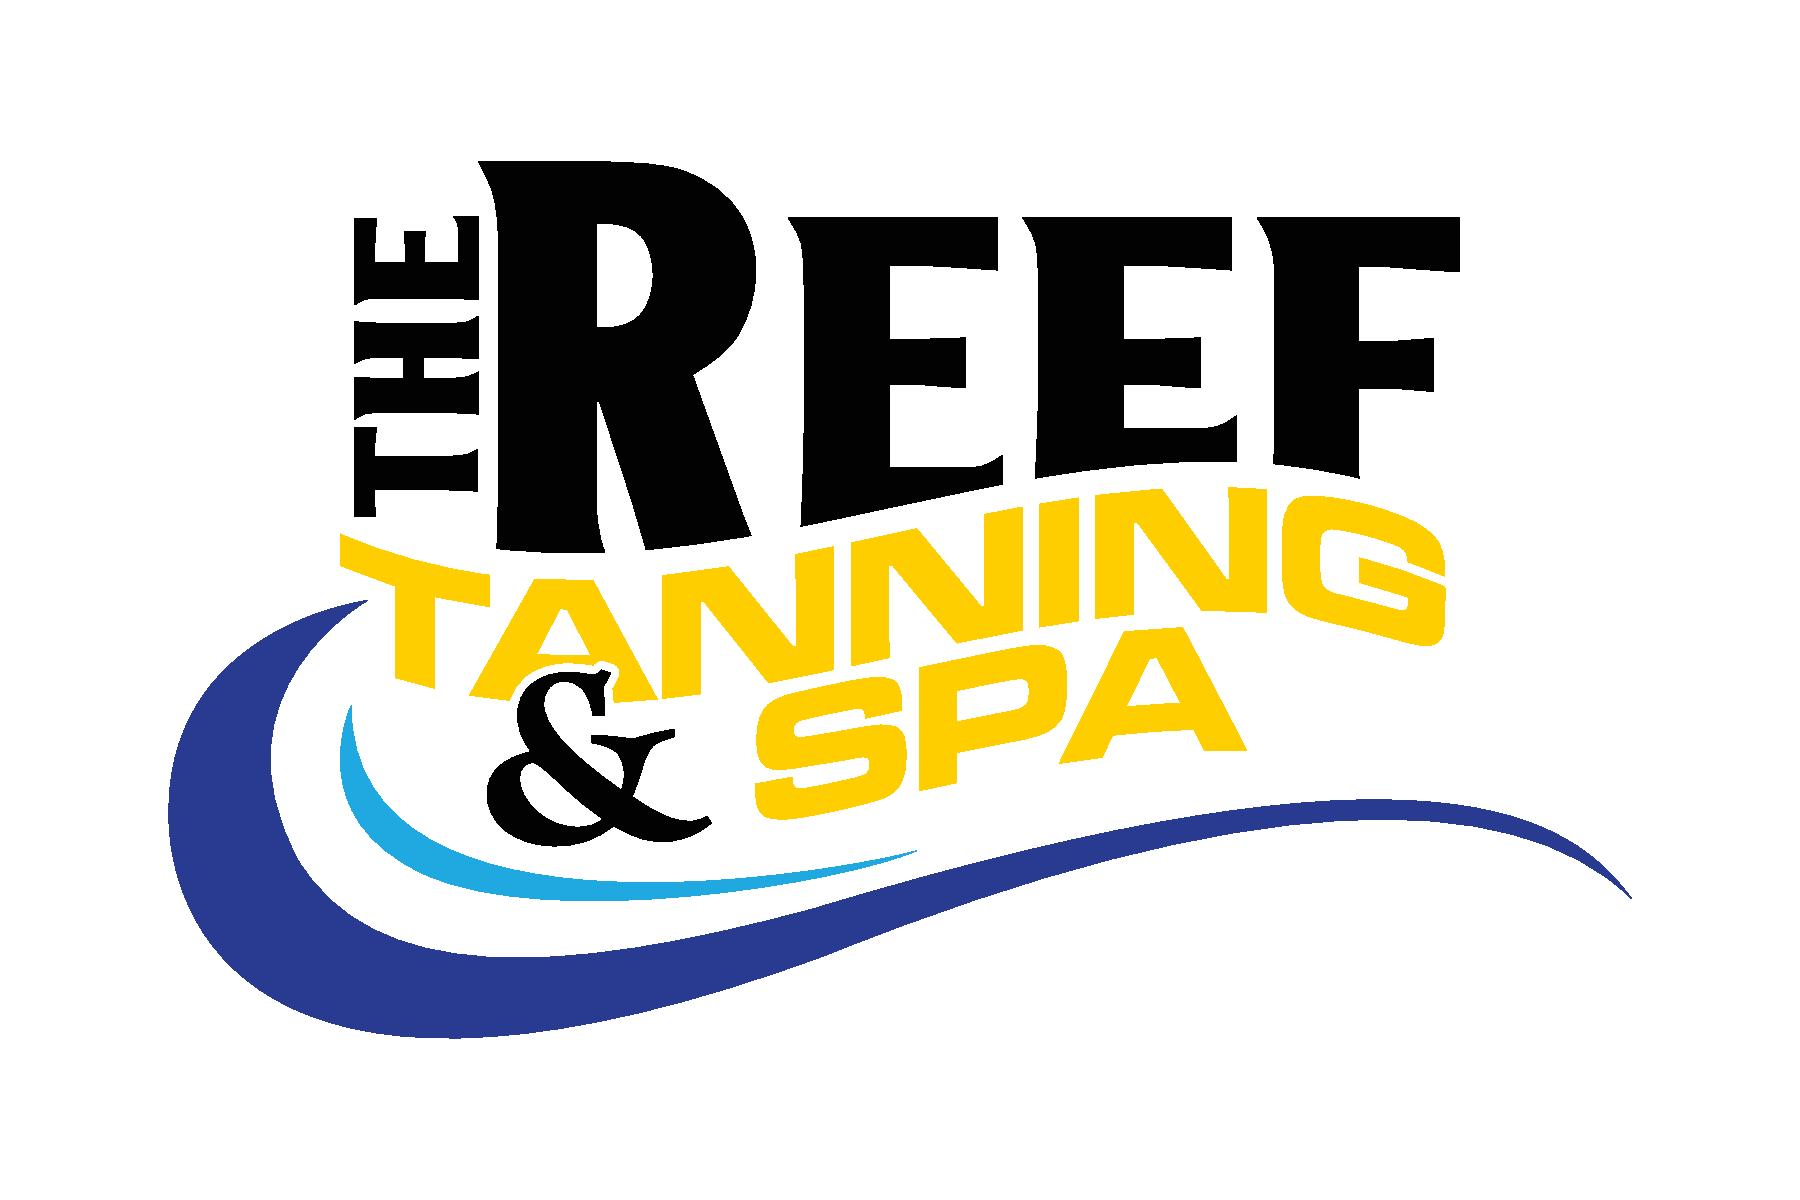 The Reef Tanning & Spa logo